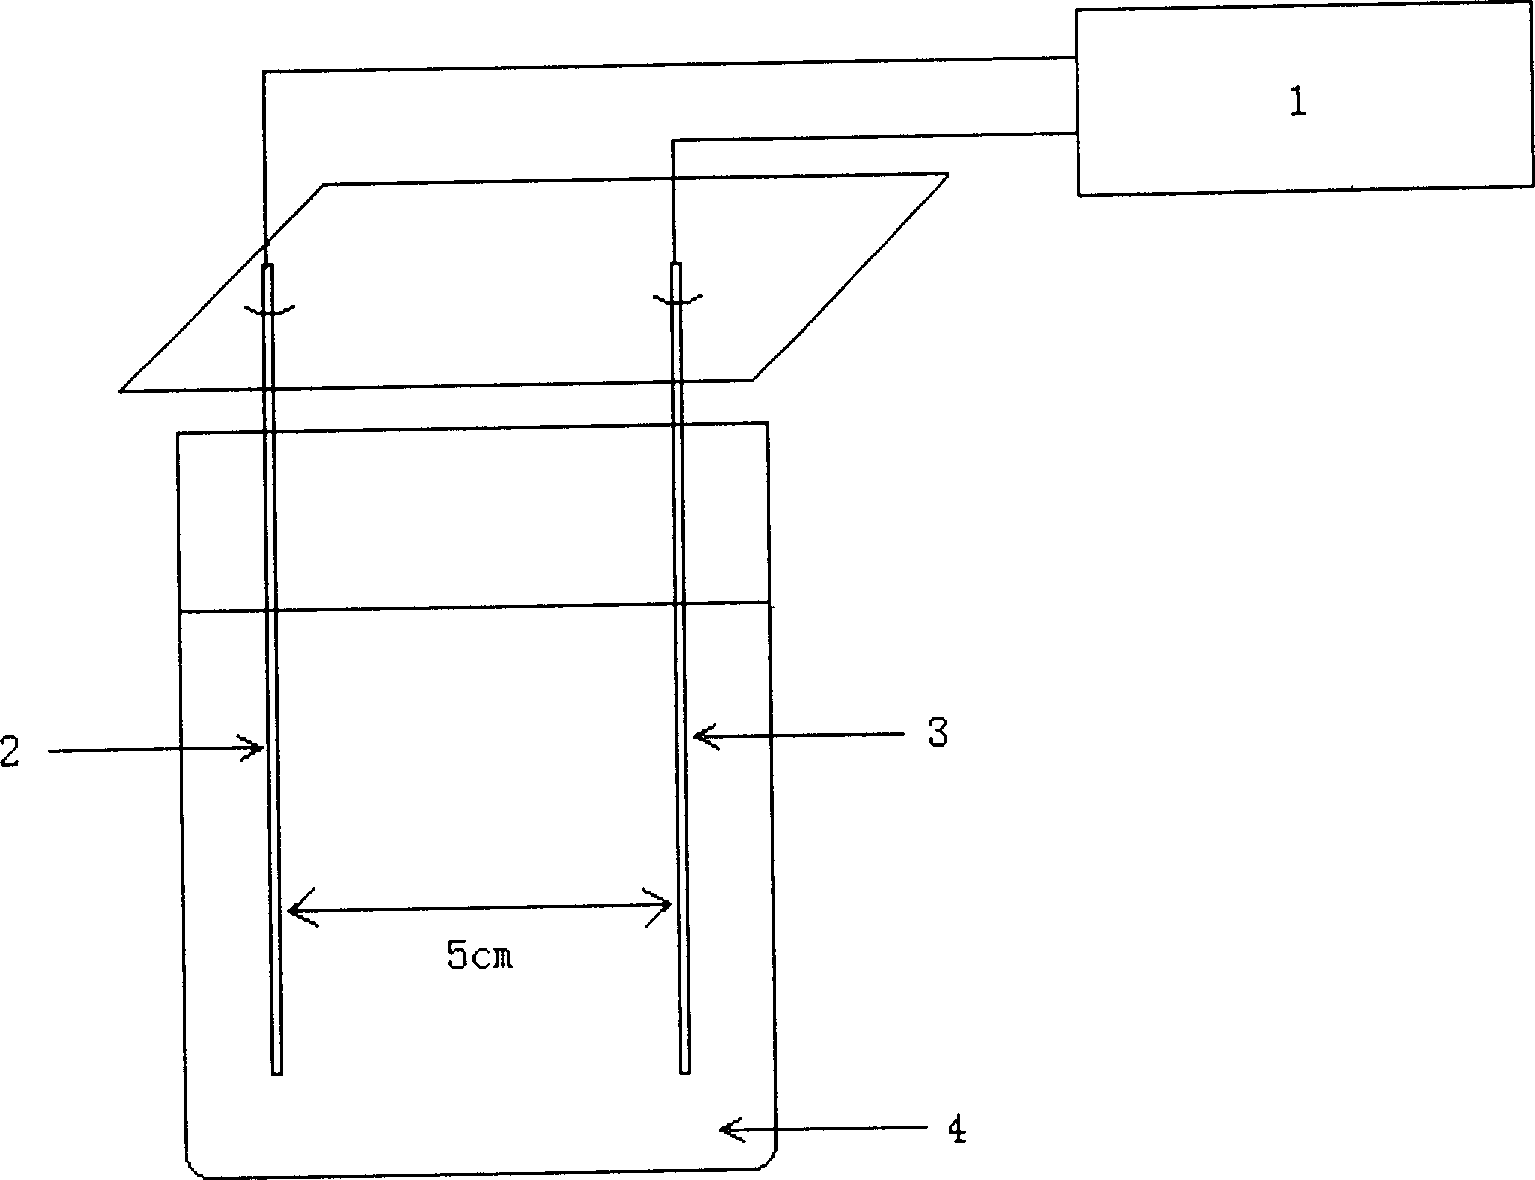 Method for preparing high temperature superconductor thick film of Ba/YCu with large area by using electrophoresis technique